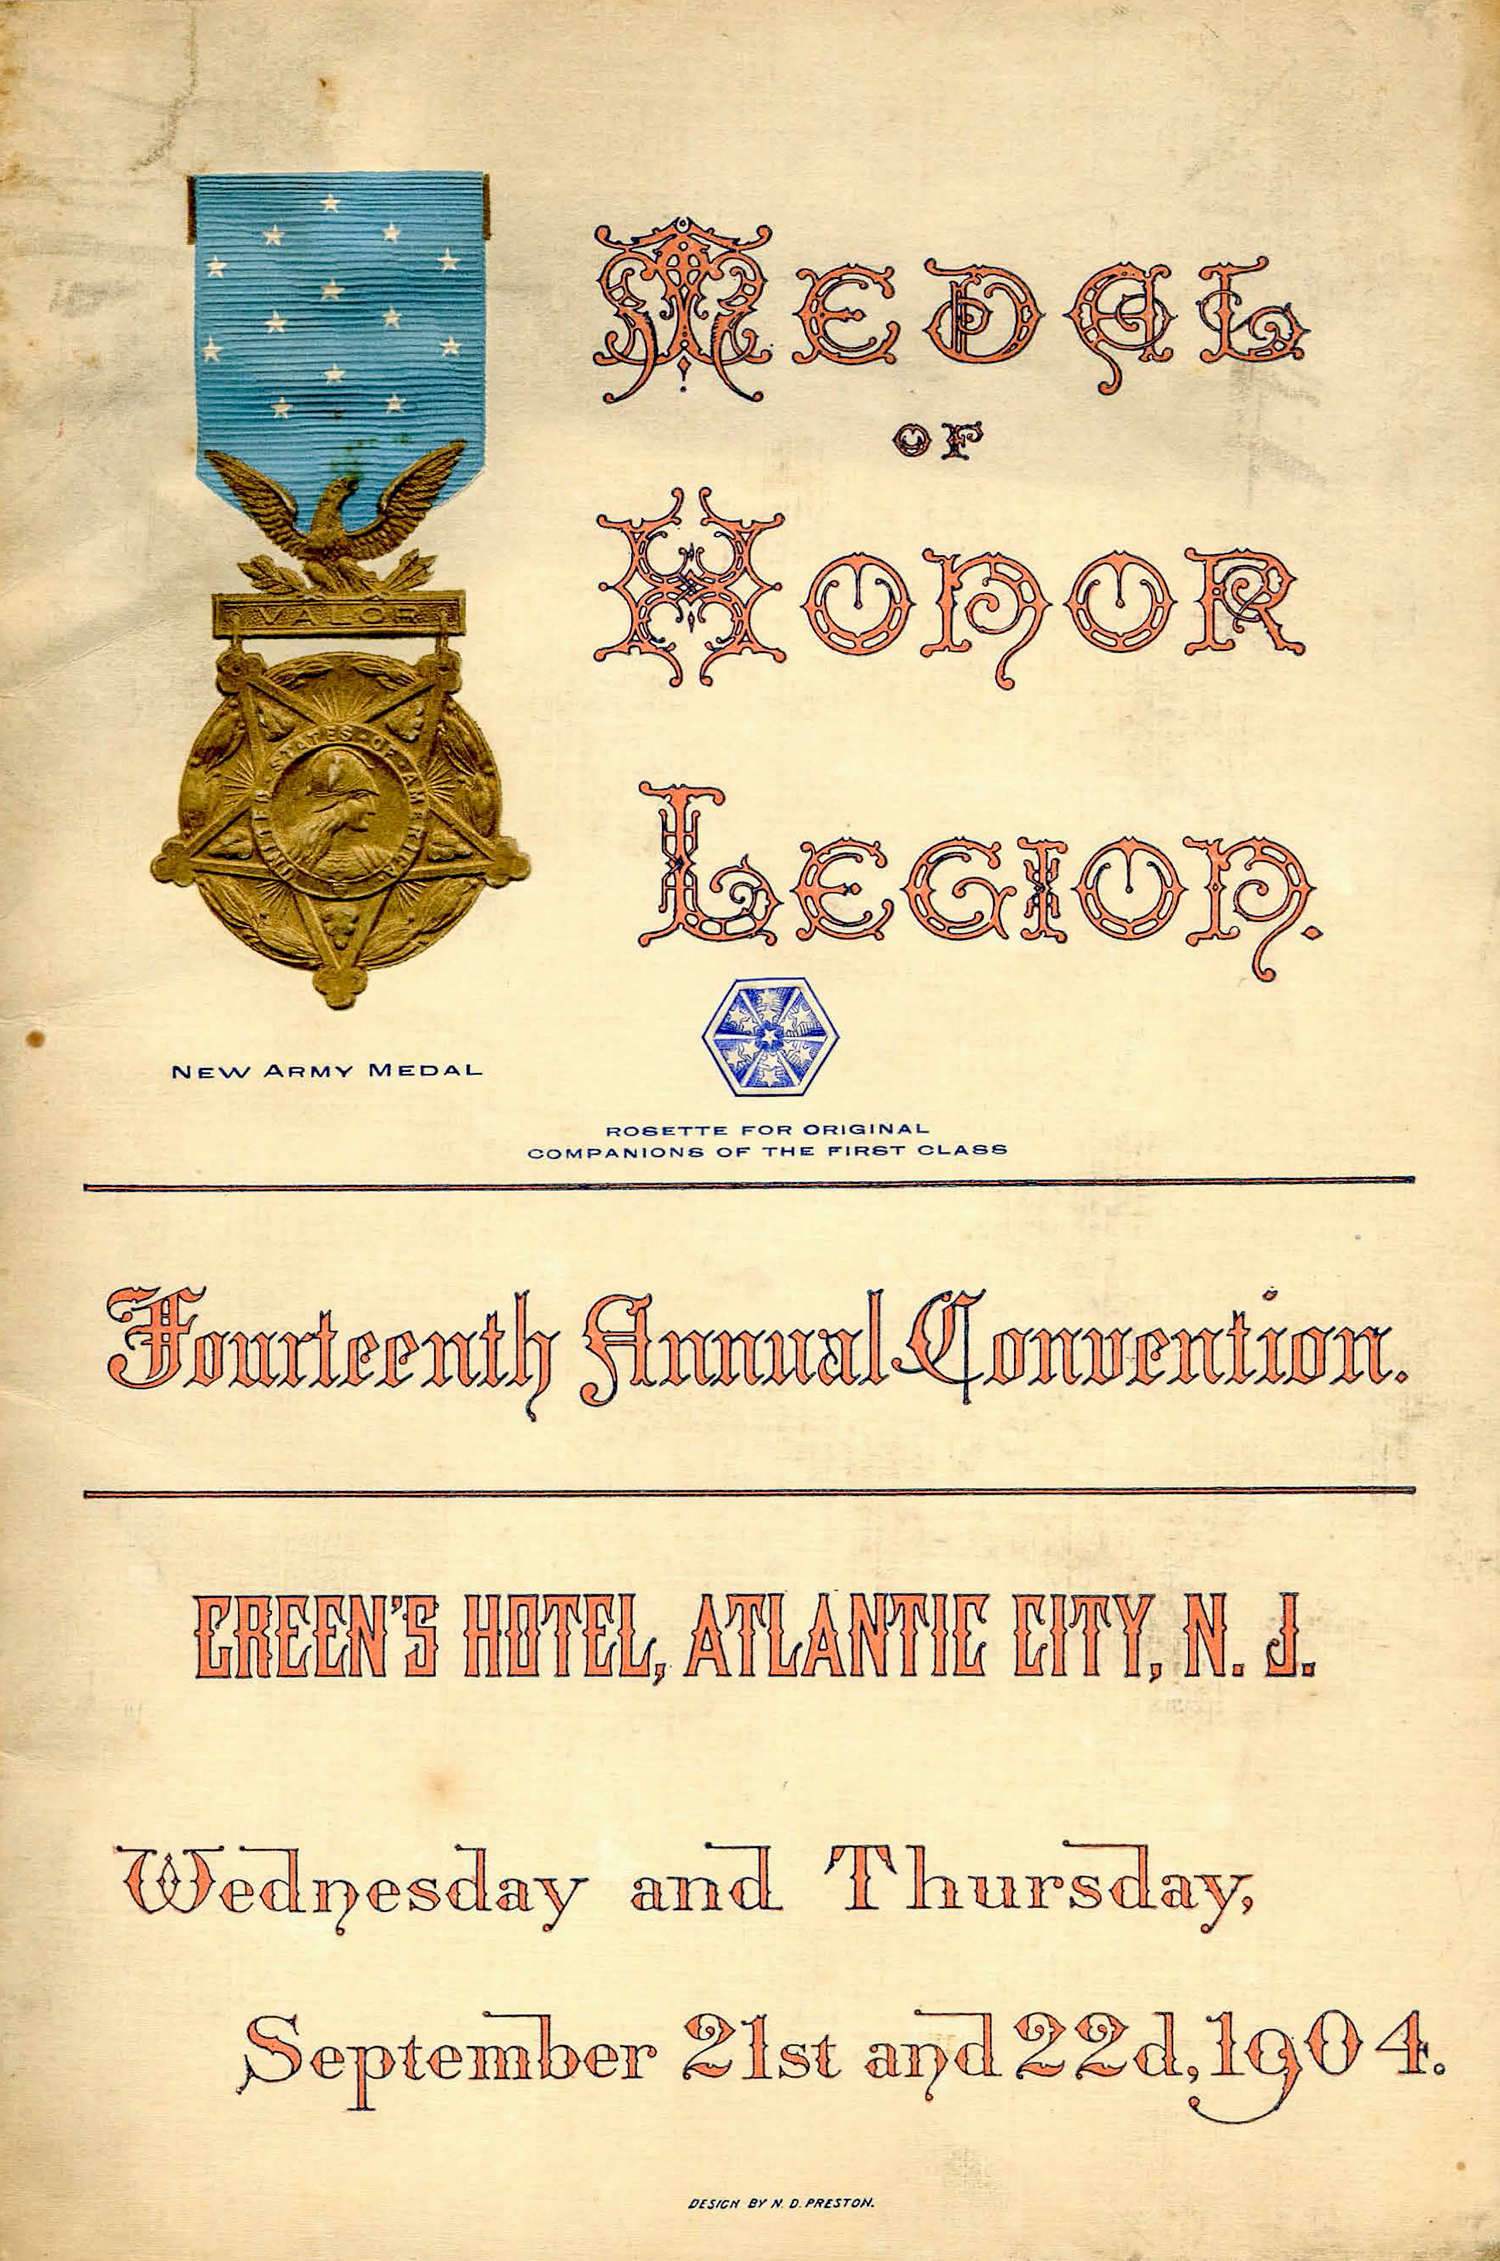 Cover page for the Medal of Honor Legion’s Fourteenth Annual Convention with an image of the redesigned Medal of Honor. 